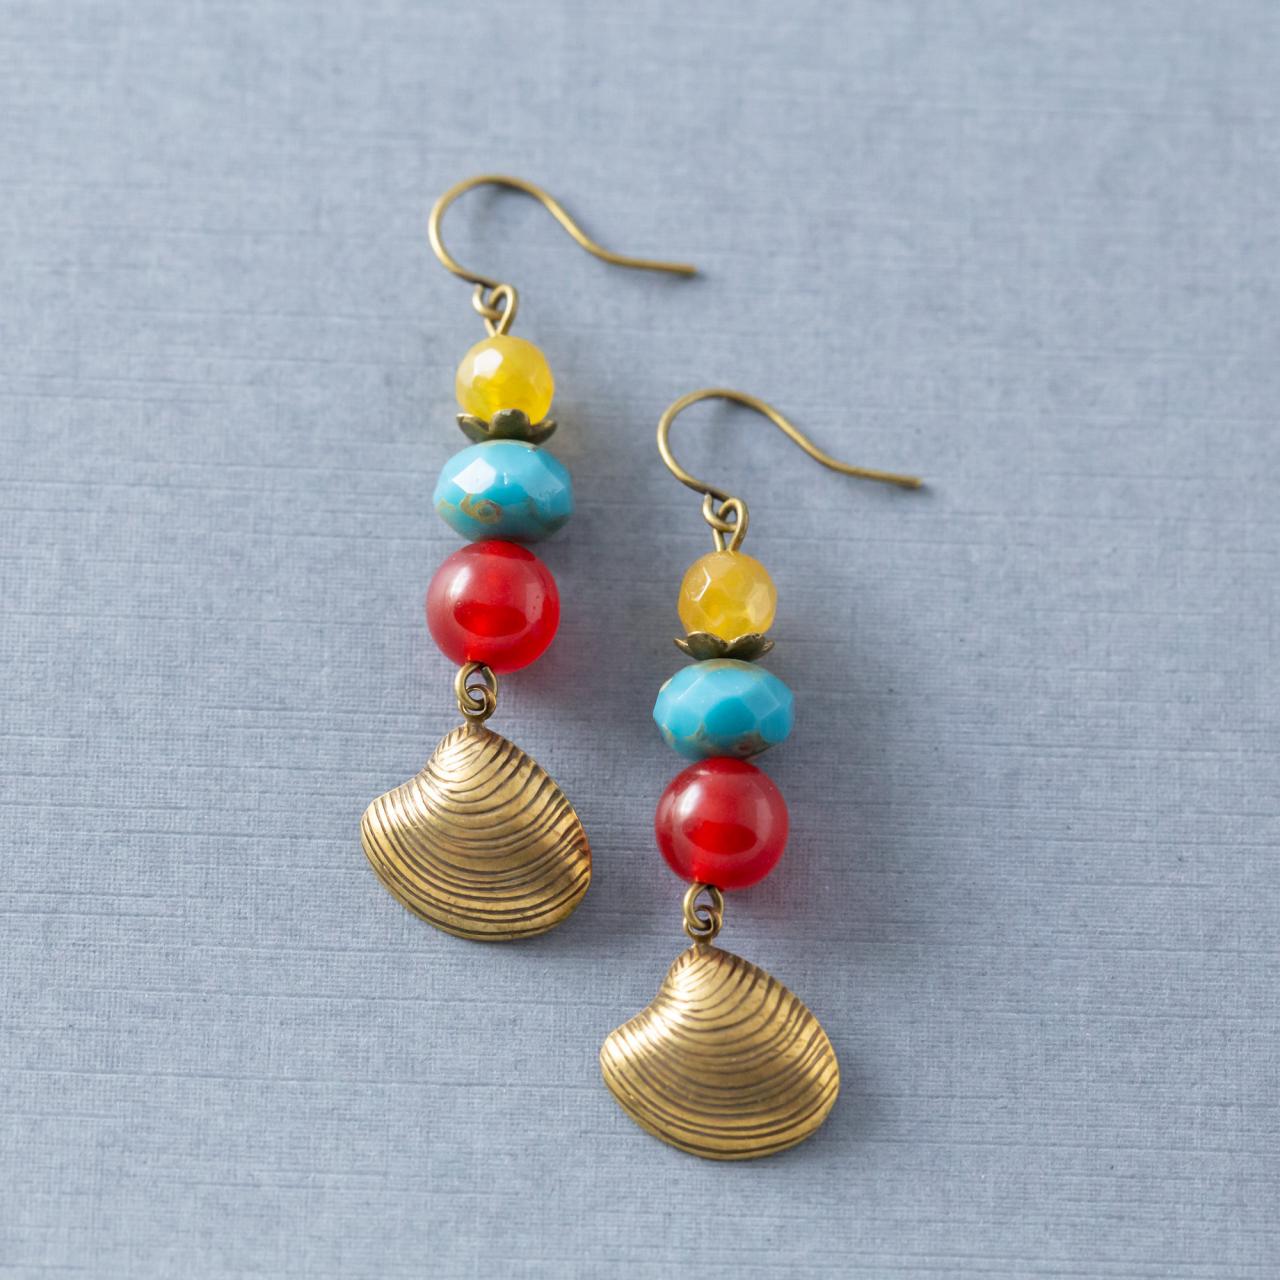 Colorful Boho Beach Shell Earrings With Yellow Agate, Red Quartzite, And Blue Czech Glass Beads, Beach Jewelry, Pawleys Island Made